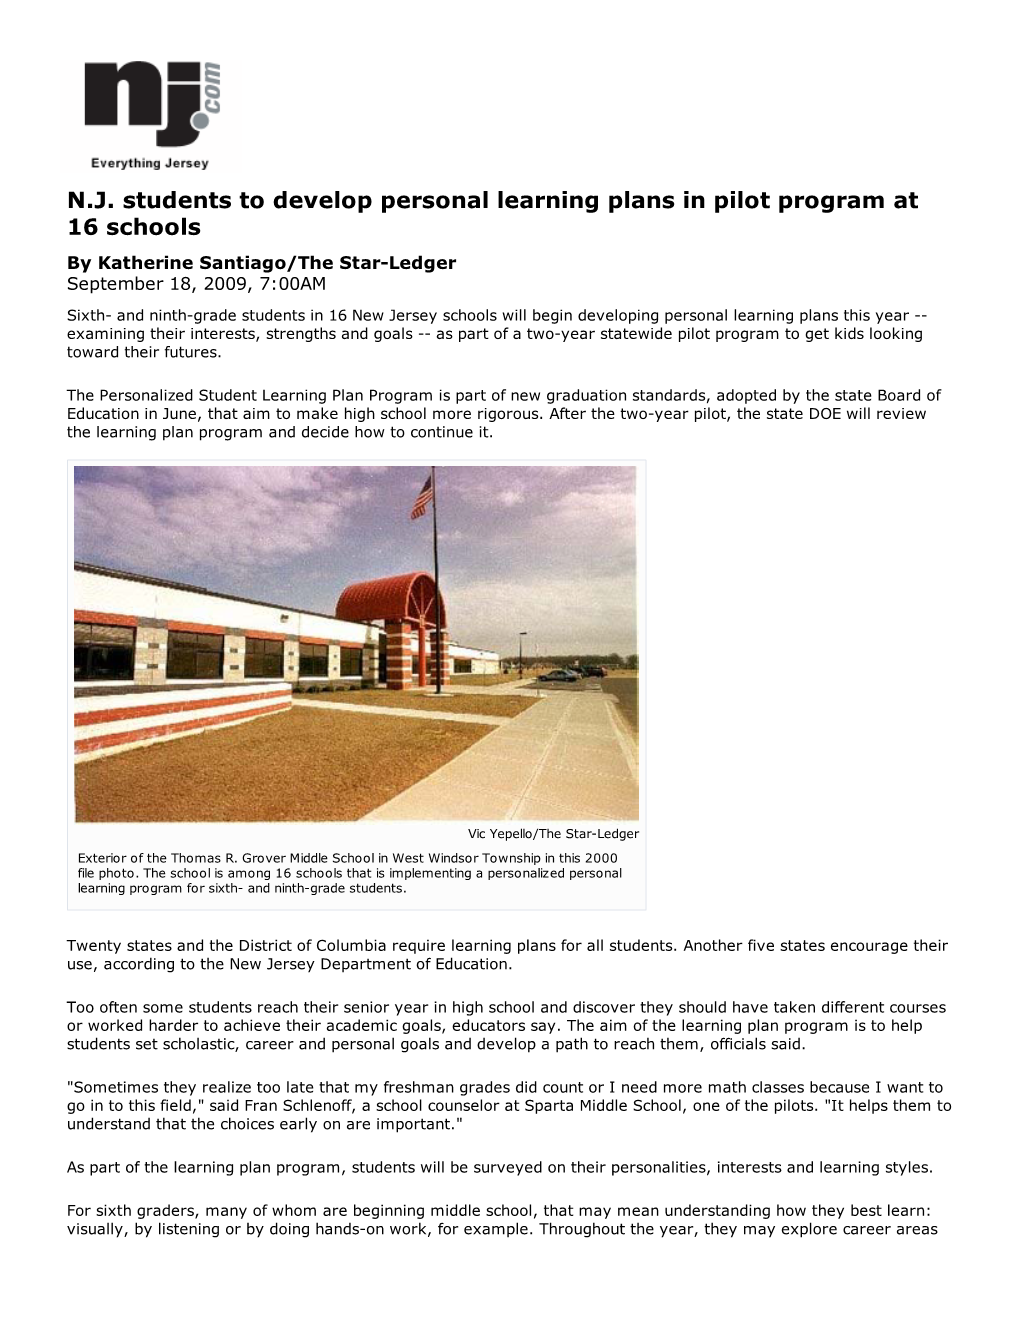 N.J. Students to Develop Personal Learning Plans in Pilot Program at 16 Schools by Katherine Santiago/The Star-Ledger September 18, 2009, 7:00AM